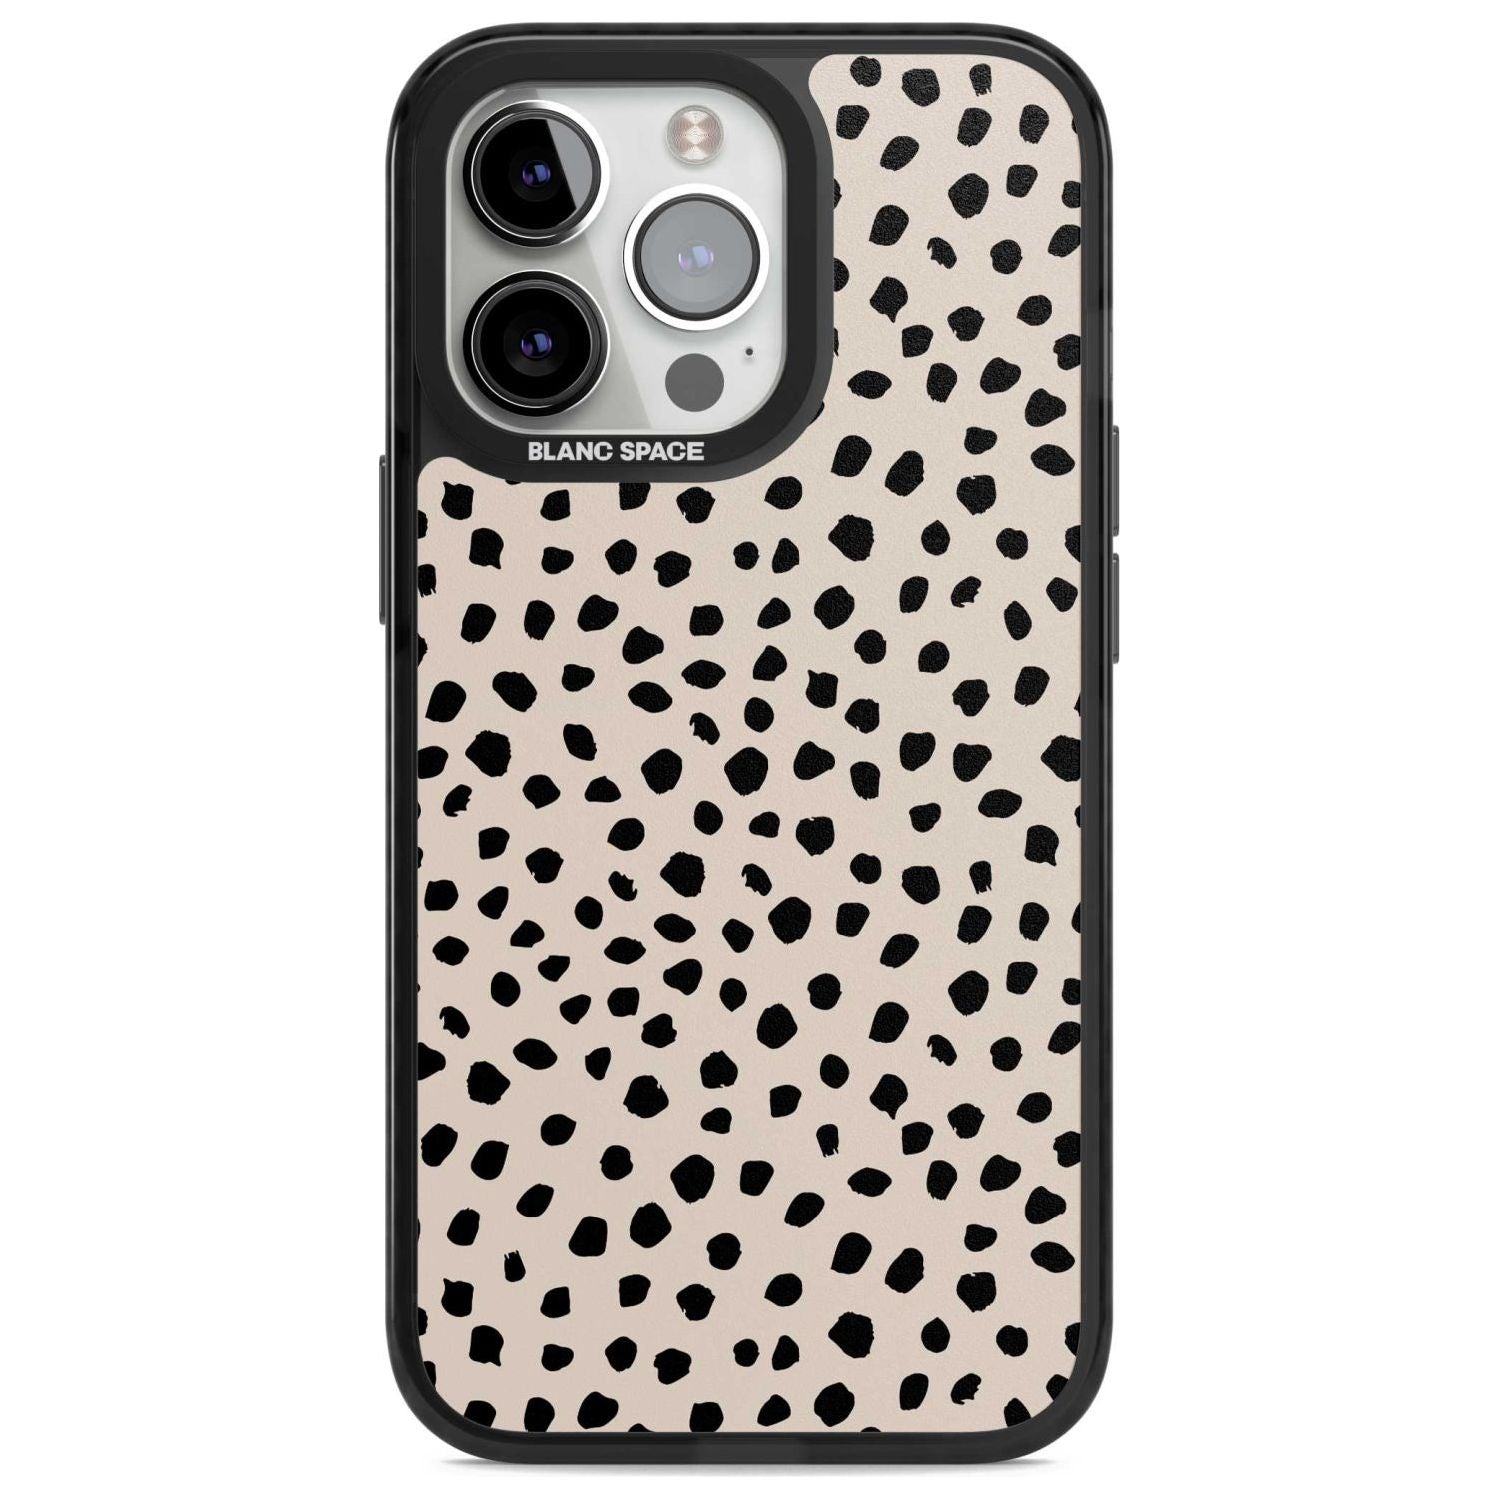 Almond Latte Phone Case iPhone 15 Pro Max / Magsafe Black Impact Case,iPhone 15 Pro / Magsafe Black Impact Case,iPhone 14 Pro Max / Magsafe Black Impact Case,iPhone 14 Pro / Magsafe Black Impact Case,iPhone 13 Pro / Magsafe Black Impact Case Blanc Space